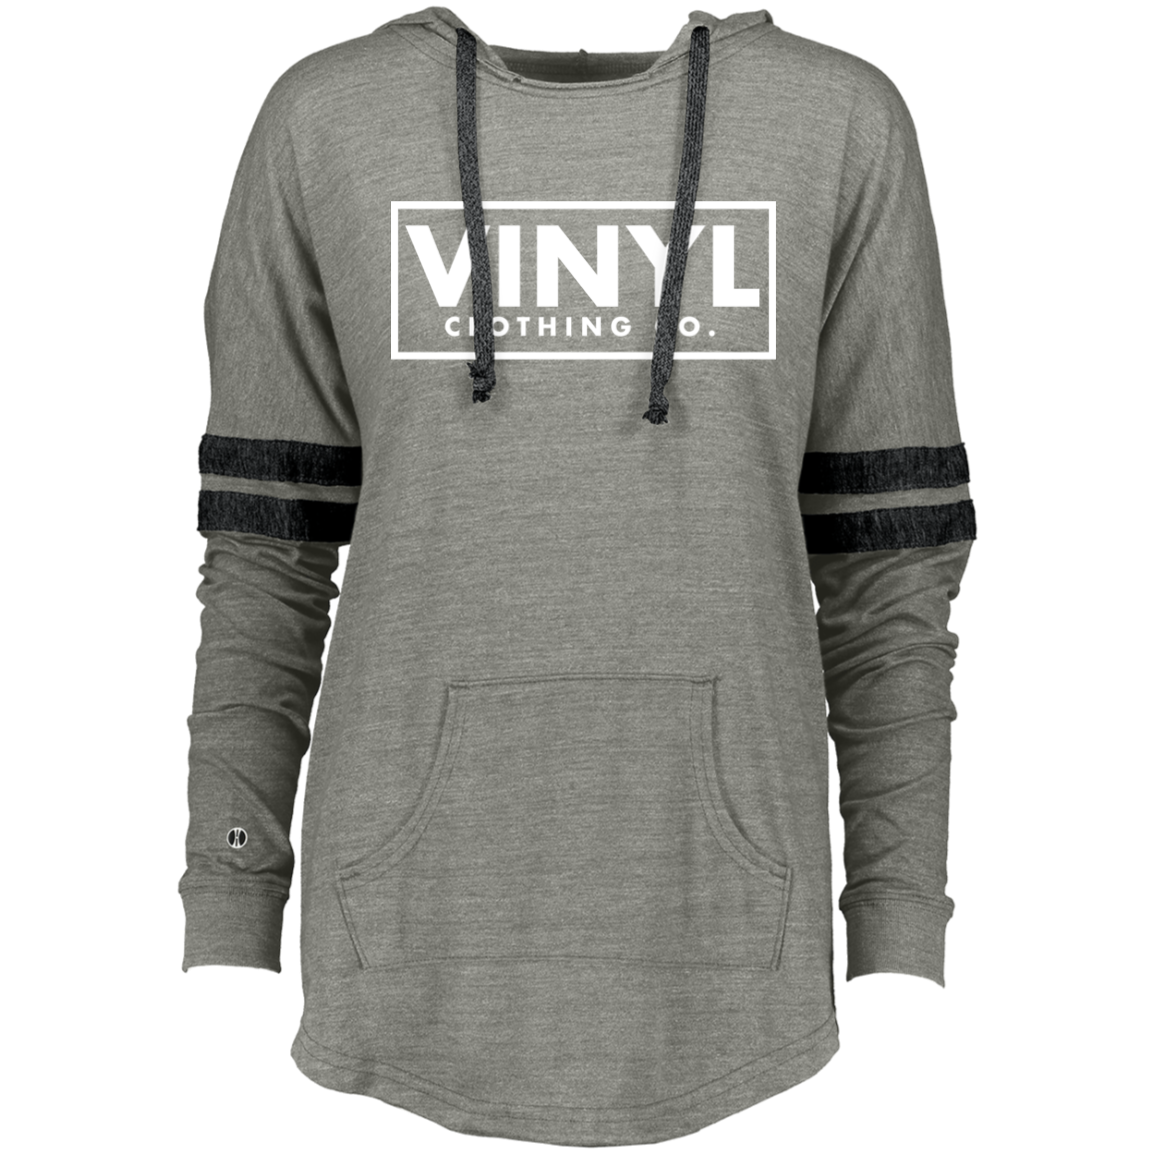 Vinyl Clothing Co. Holloway Ladies Hooded Low Key Pullover